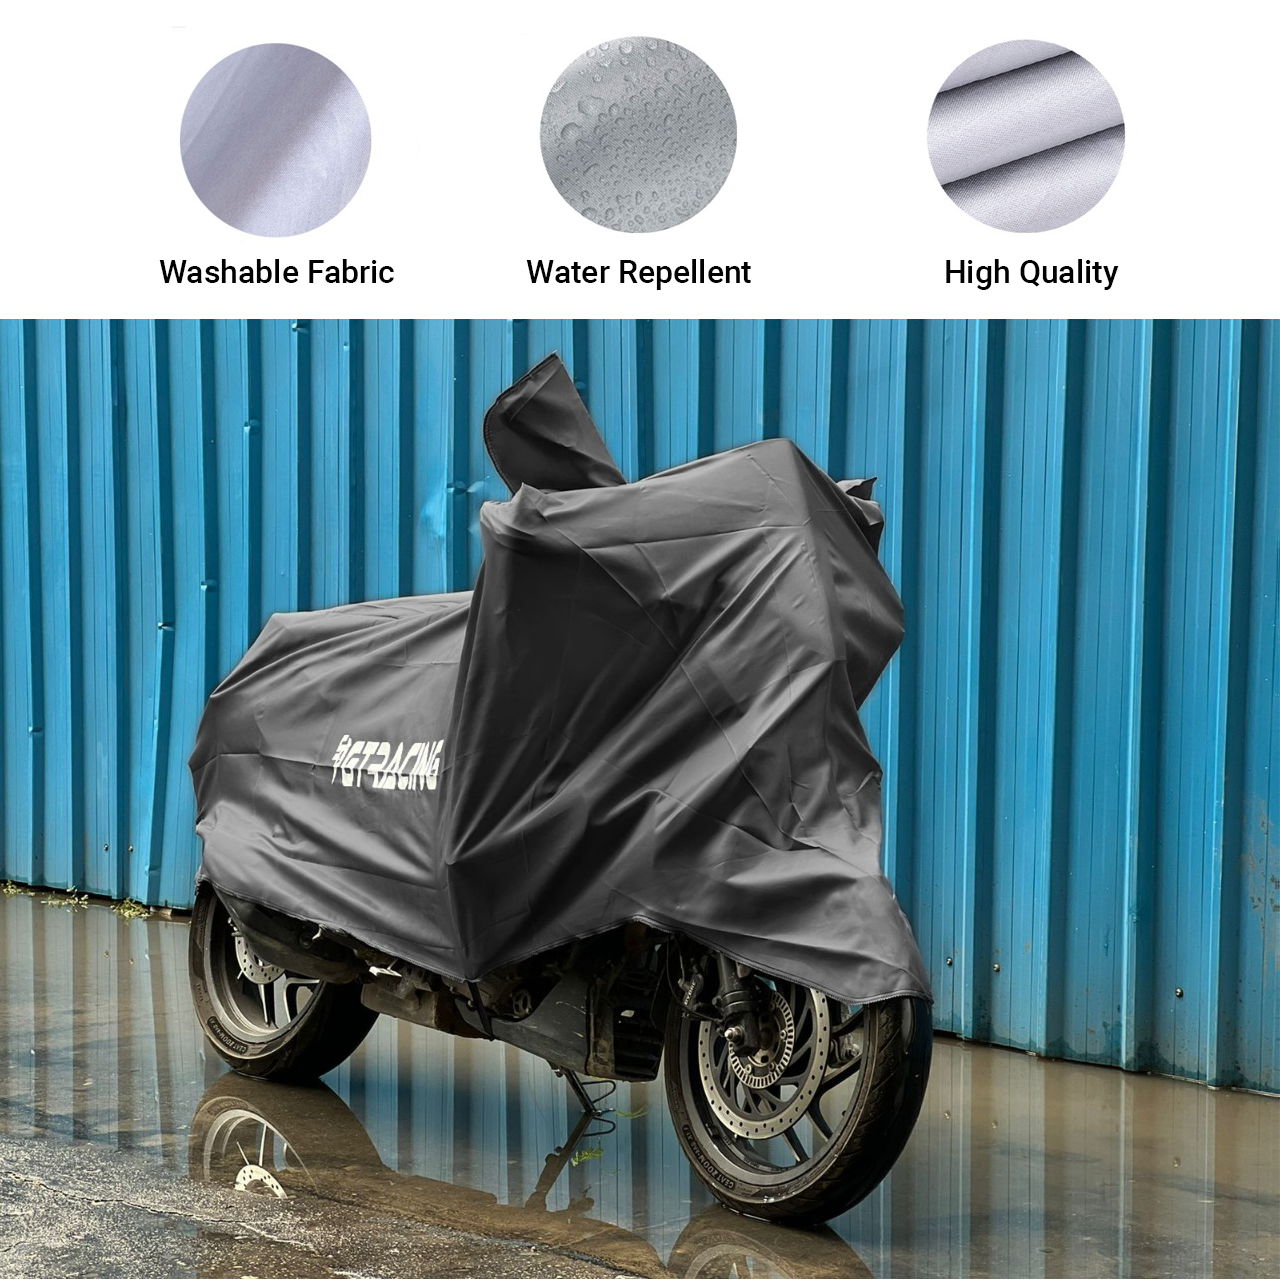 Steelbird Bike Cover GT Racing UV Protection Water-Resistant & Dustproof (2X2 Grey), Bike Body Cover With Carry Bag (All Sports Bikes And Above Cruiser Bikes Size)